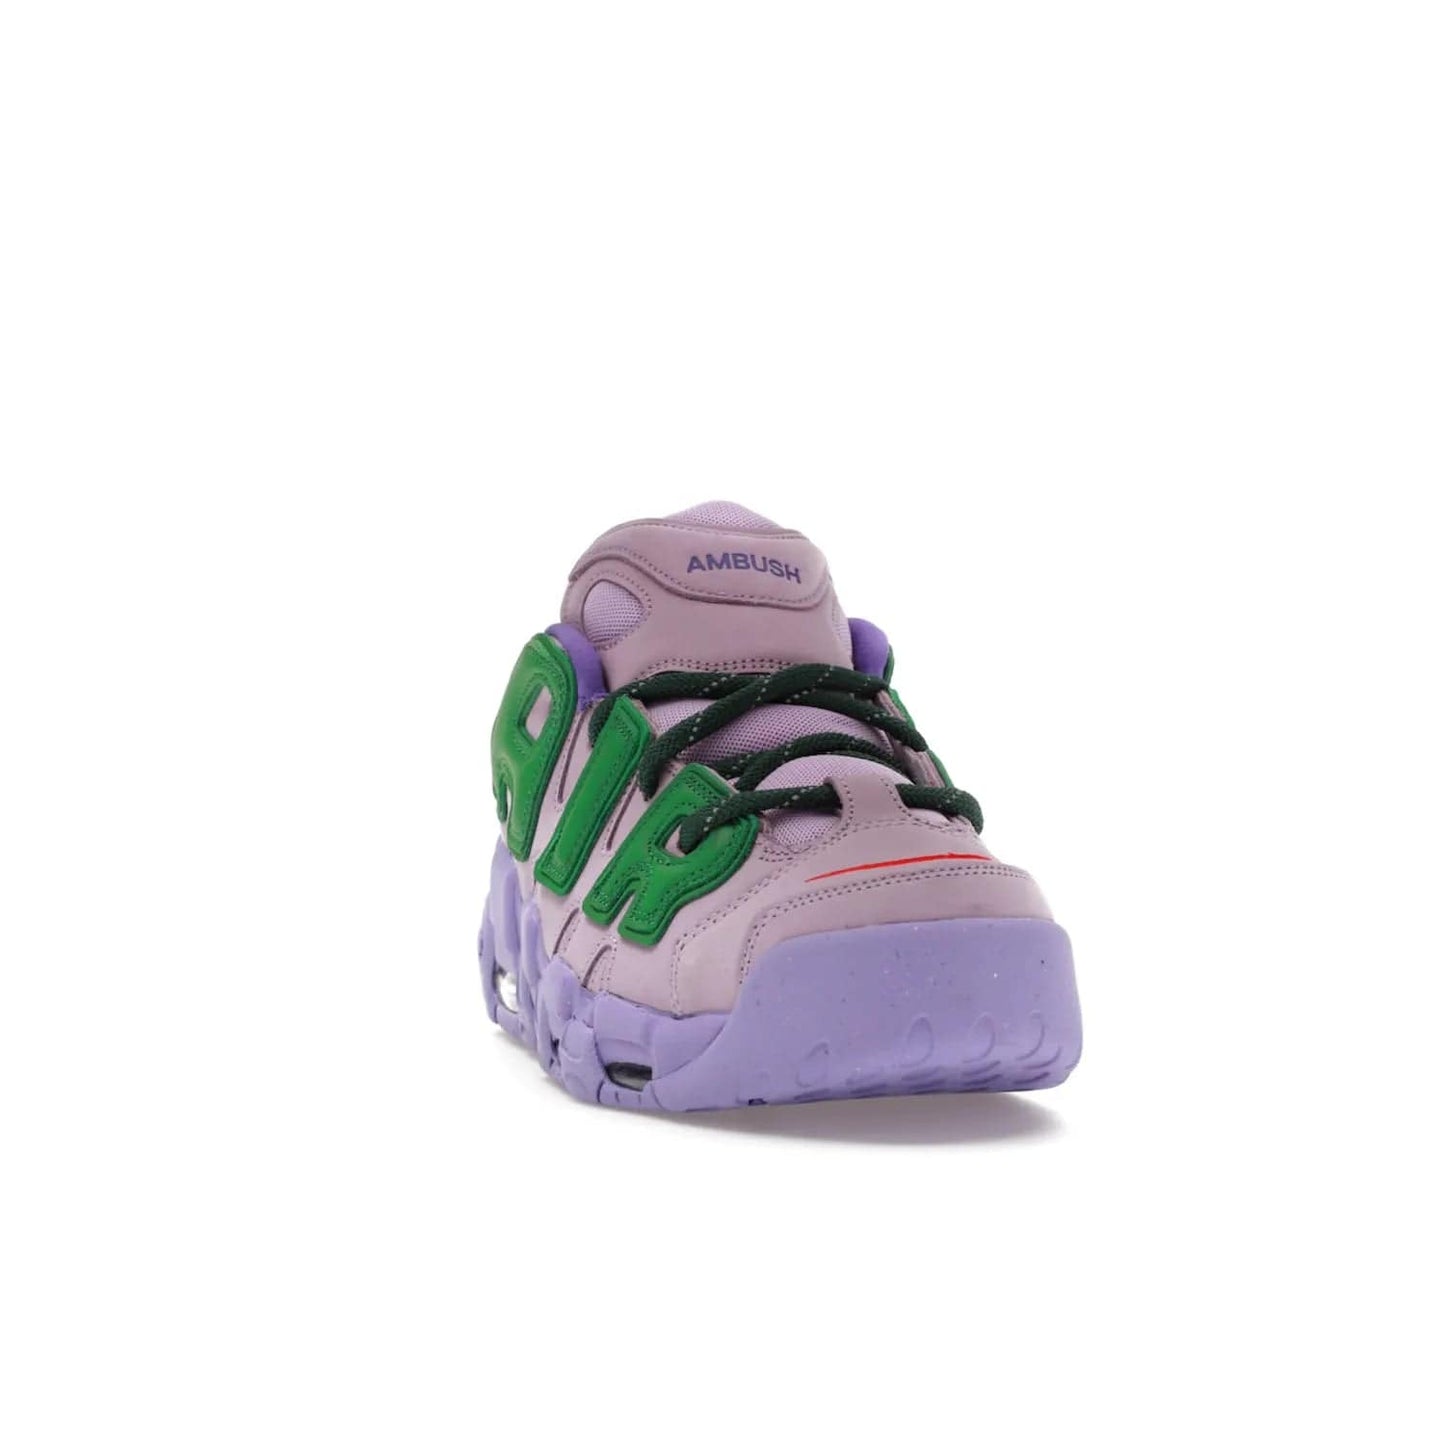 Nike Air More Uptempo Low AMBUSH Lilac - Image 8 - Only at www.BallersClubKickz.com - Style and comfort meet with the Nike Air More Uptempo Low AMBUSH Lilac. Featuring a vibrant Lilac upper with Apple Green and University Red accents, this unique design will be a standout in any wardrobe. Get your pair on October 06, 2023.